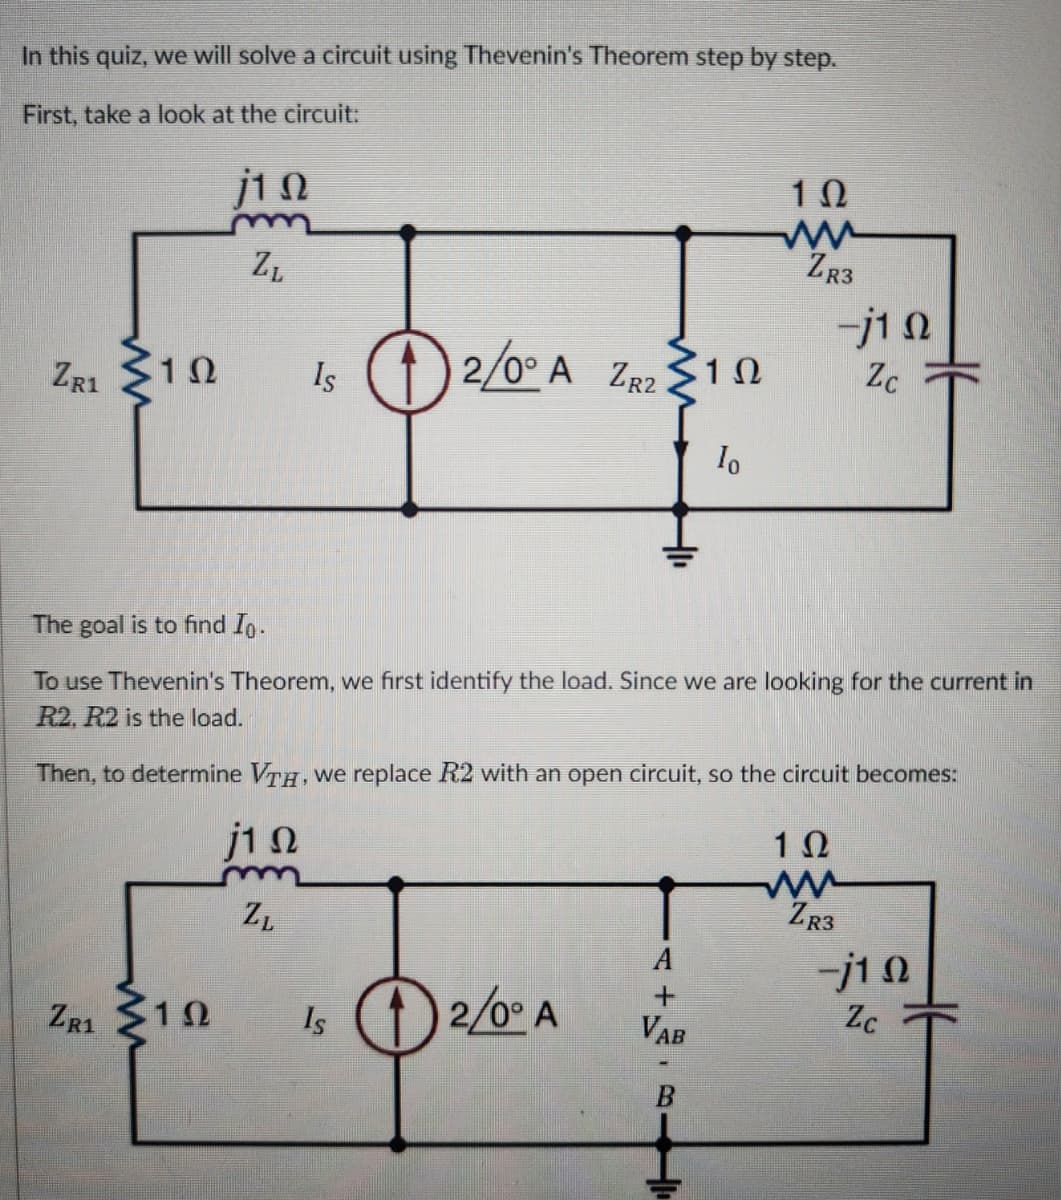 In this quiz, we will solve a circuit using Thevenin's Theorem step by step.
First, take a look at the circuit:
j10
ZL
10
ww
ZR3
ZR1
1 Ω
Is 12/0° A ZR2 10
Ω
-j10
Zc
10
The goal is to find Io.
To use Thevenin's Theorem, we first identify the load. Since we are looking for the current in
R2, R2 is the load.
Then, to determine VгH, we replace R2 with an open circuit, so the circuit becomes:
j10
ZL
1 Ω
ww
ZR3
-j10
ZR1 10
1Ω
Is 2/0° A
+
VAB
Zc